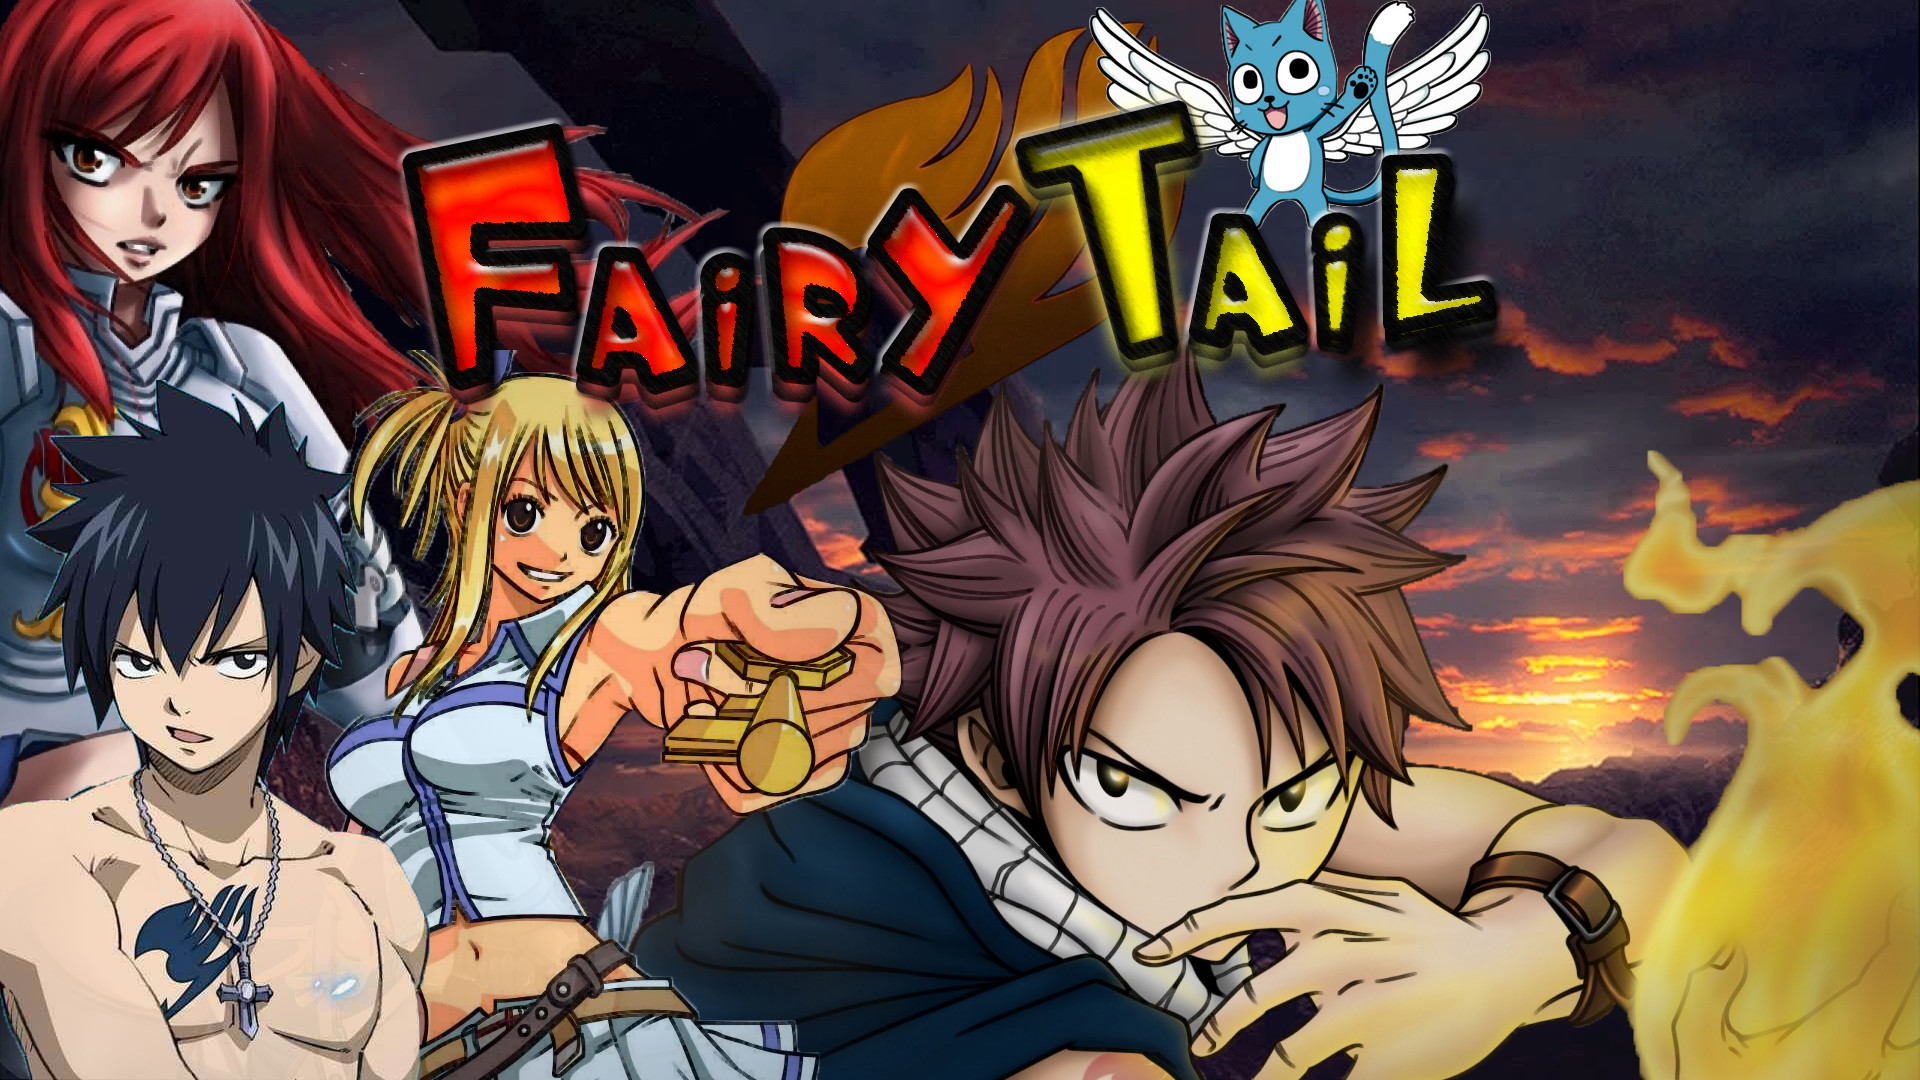 1920x1080 Fairy Tail Group Wallpaper